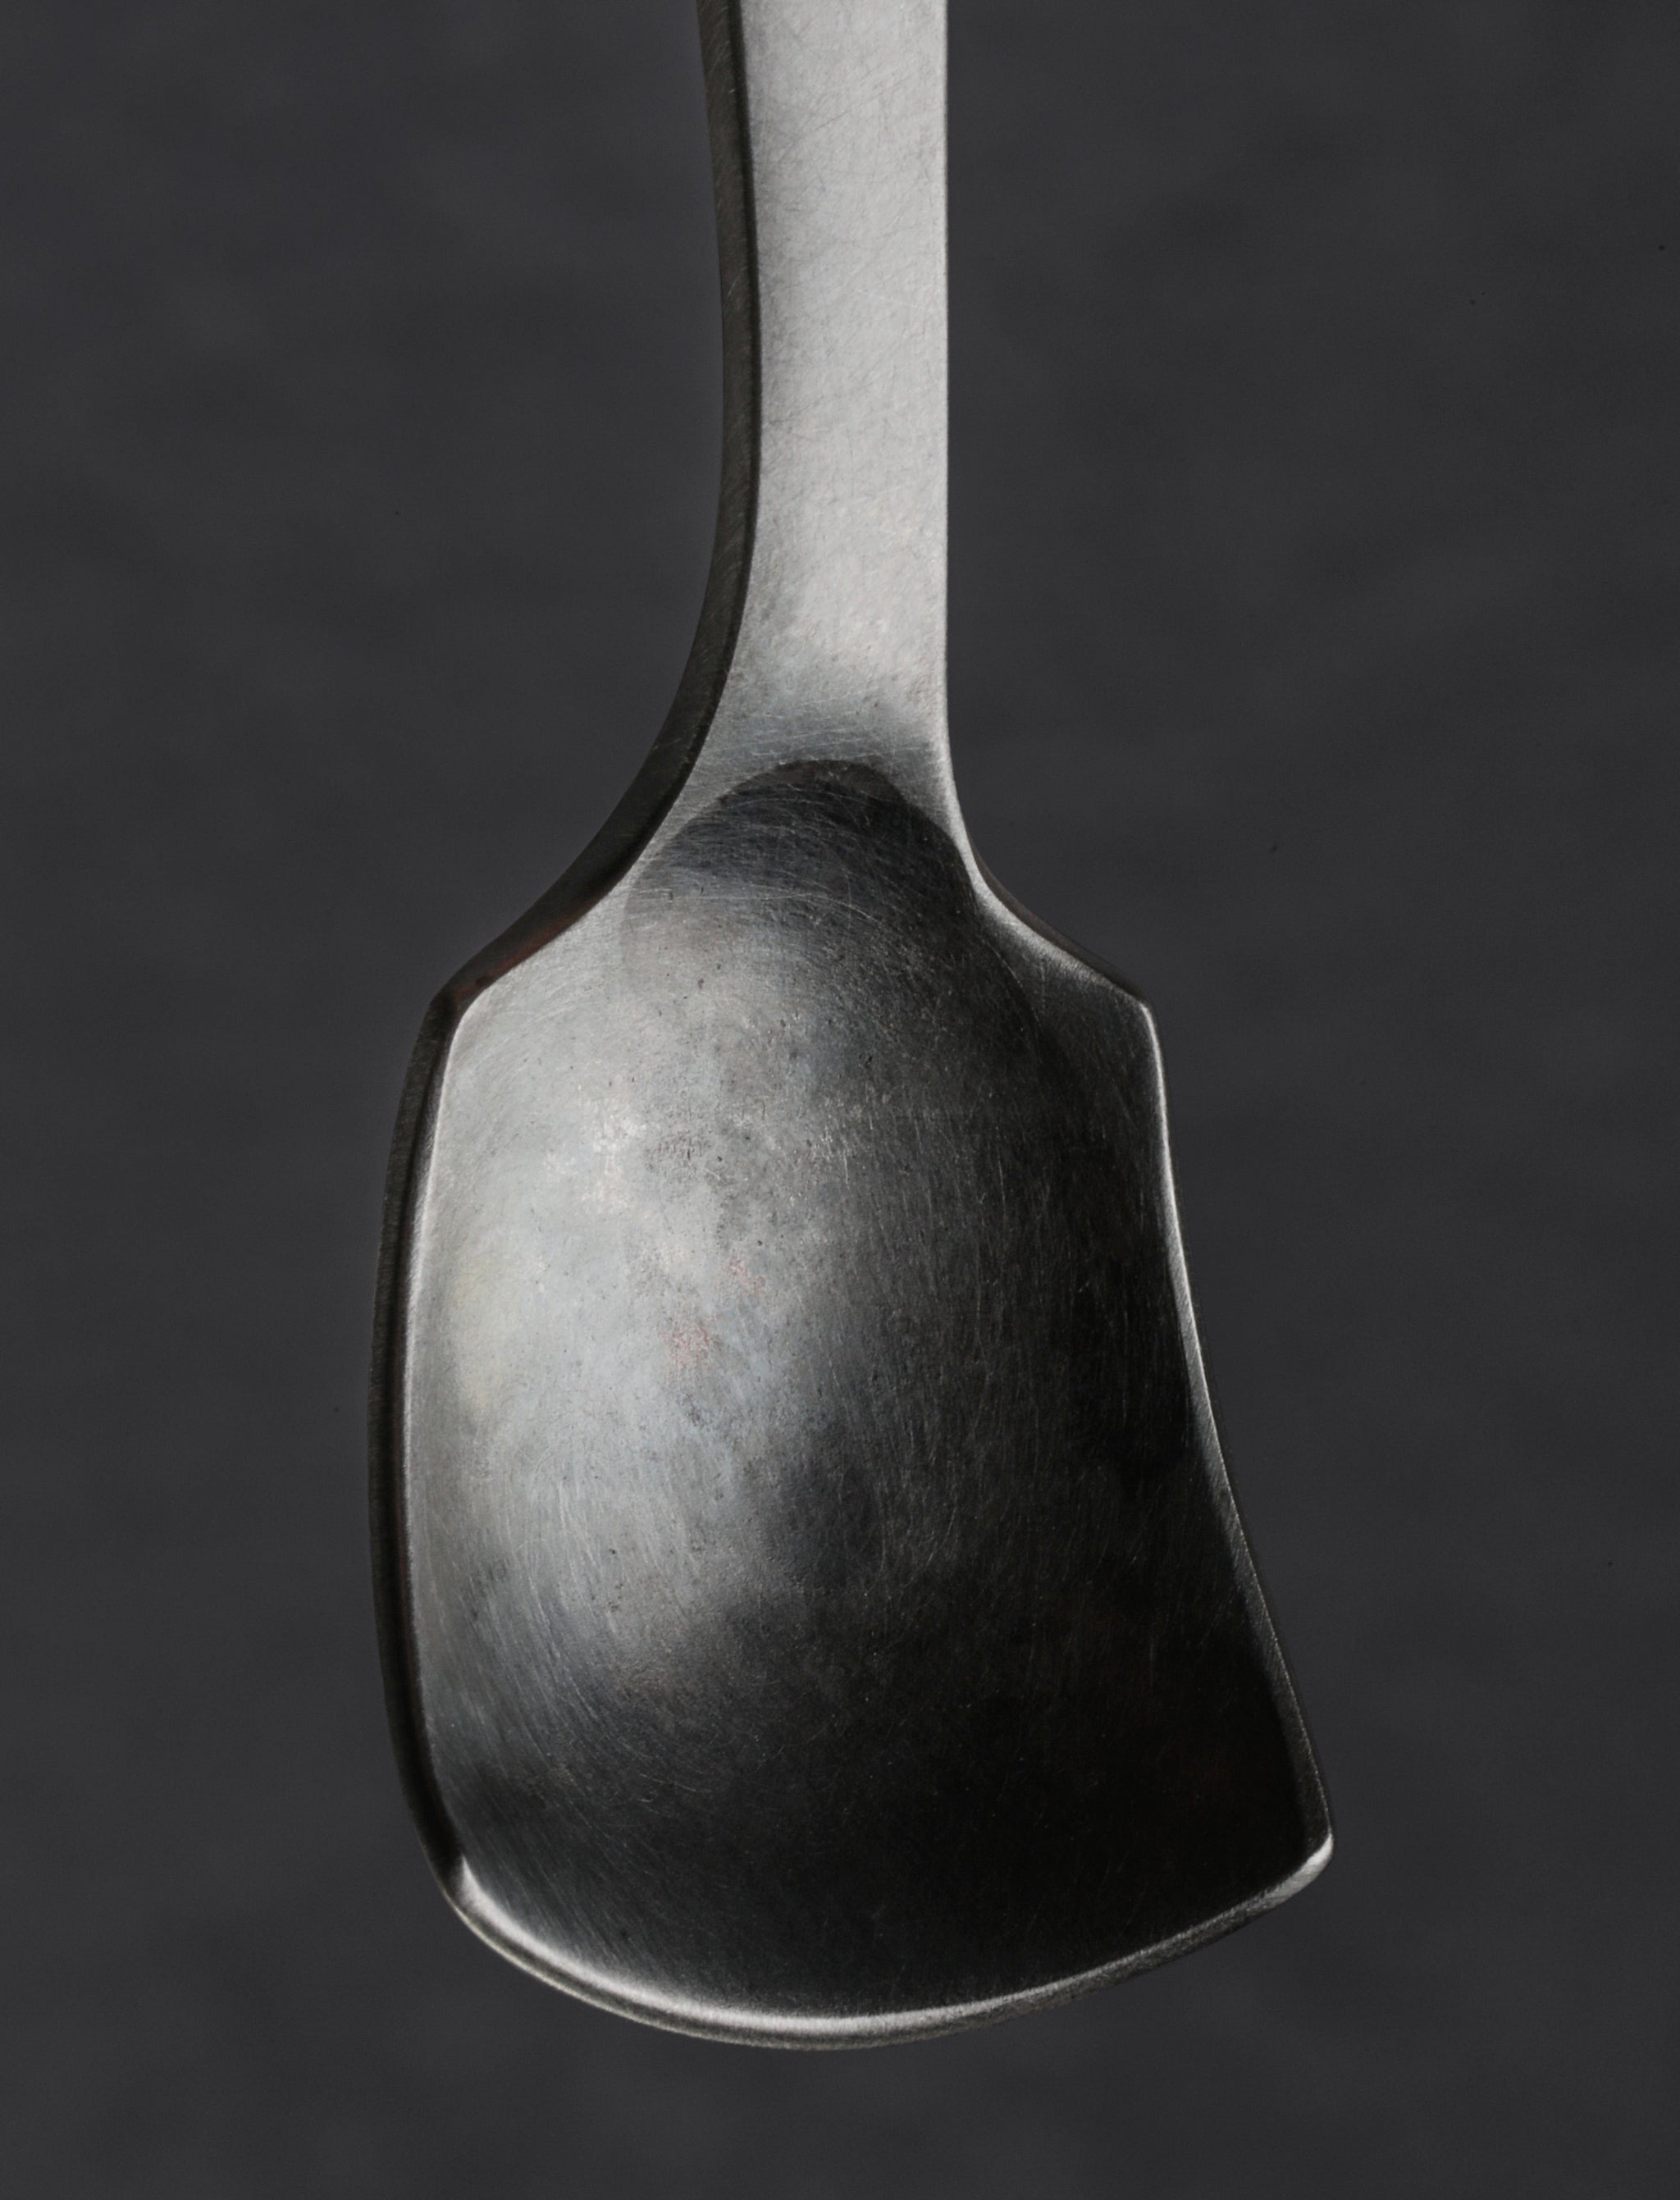 Erica Moody - Maine Spoons, Ladles & Scoops Spice Shovel